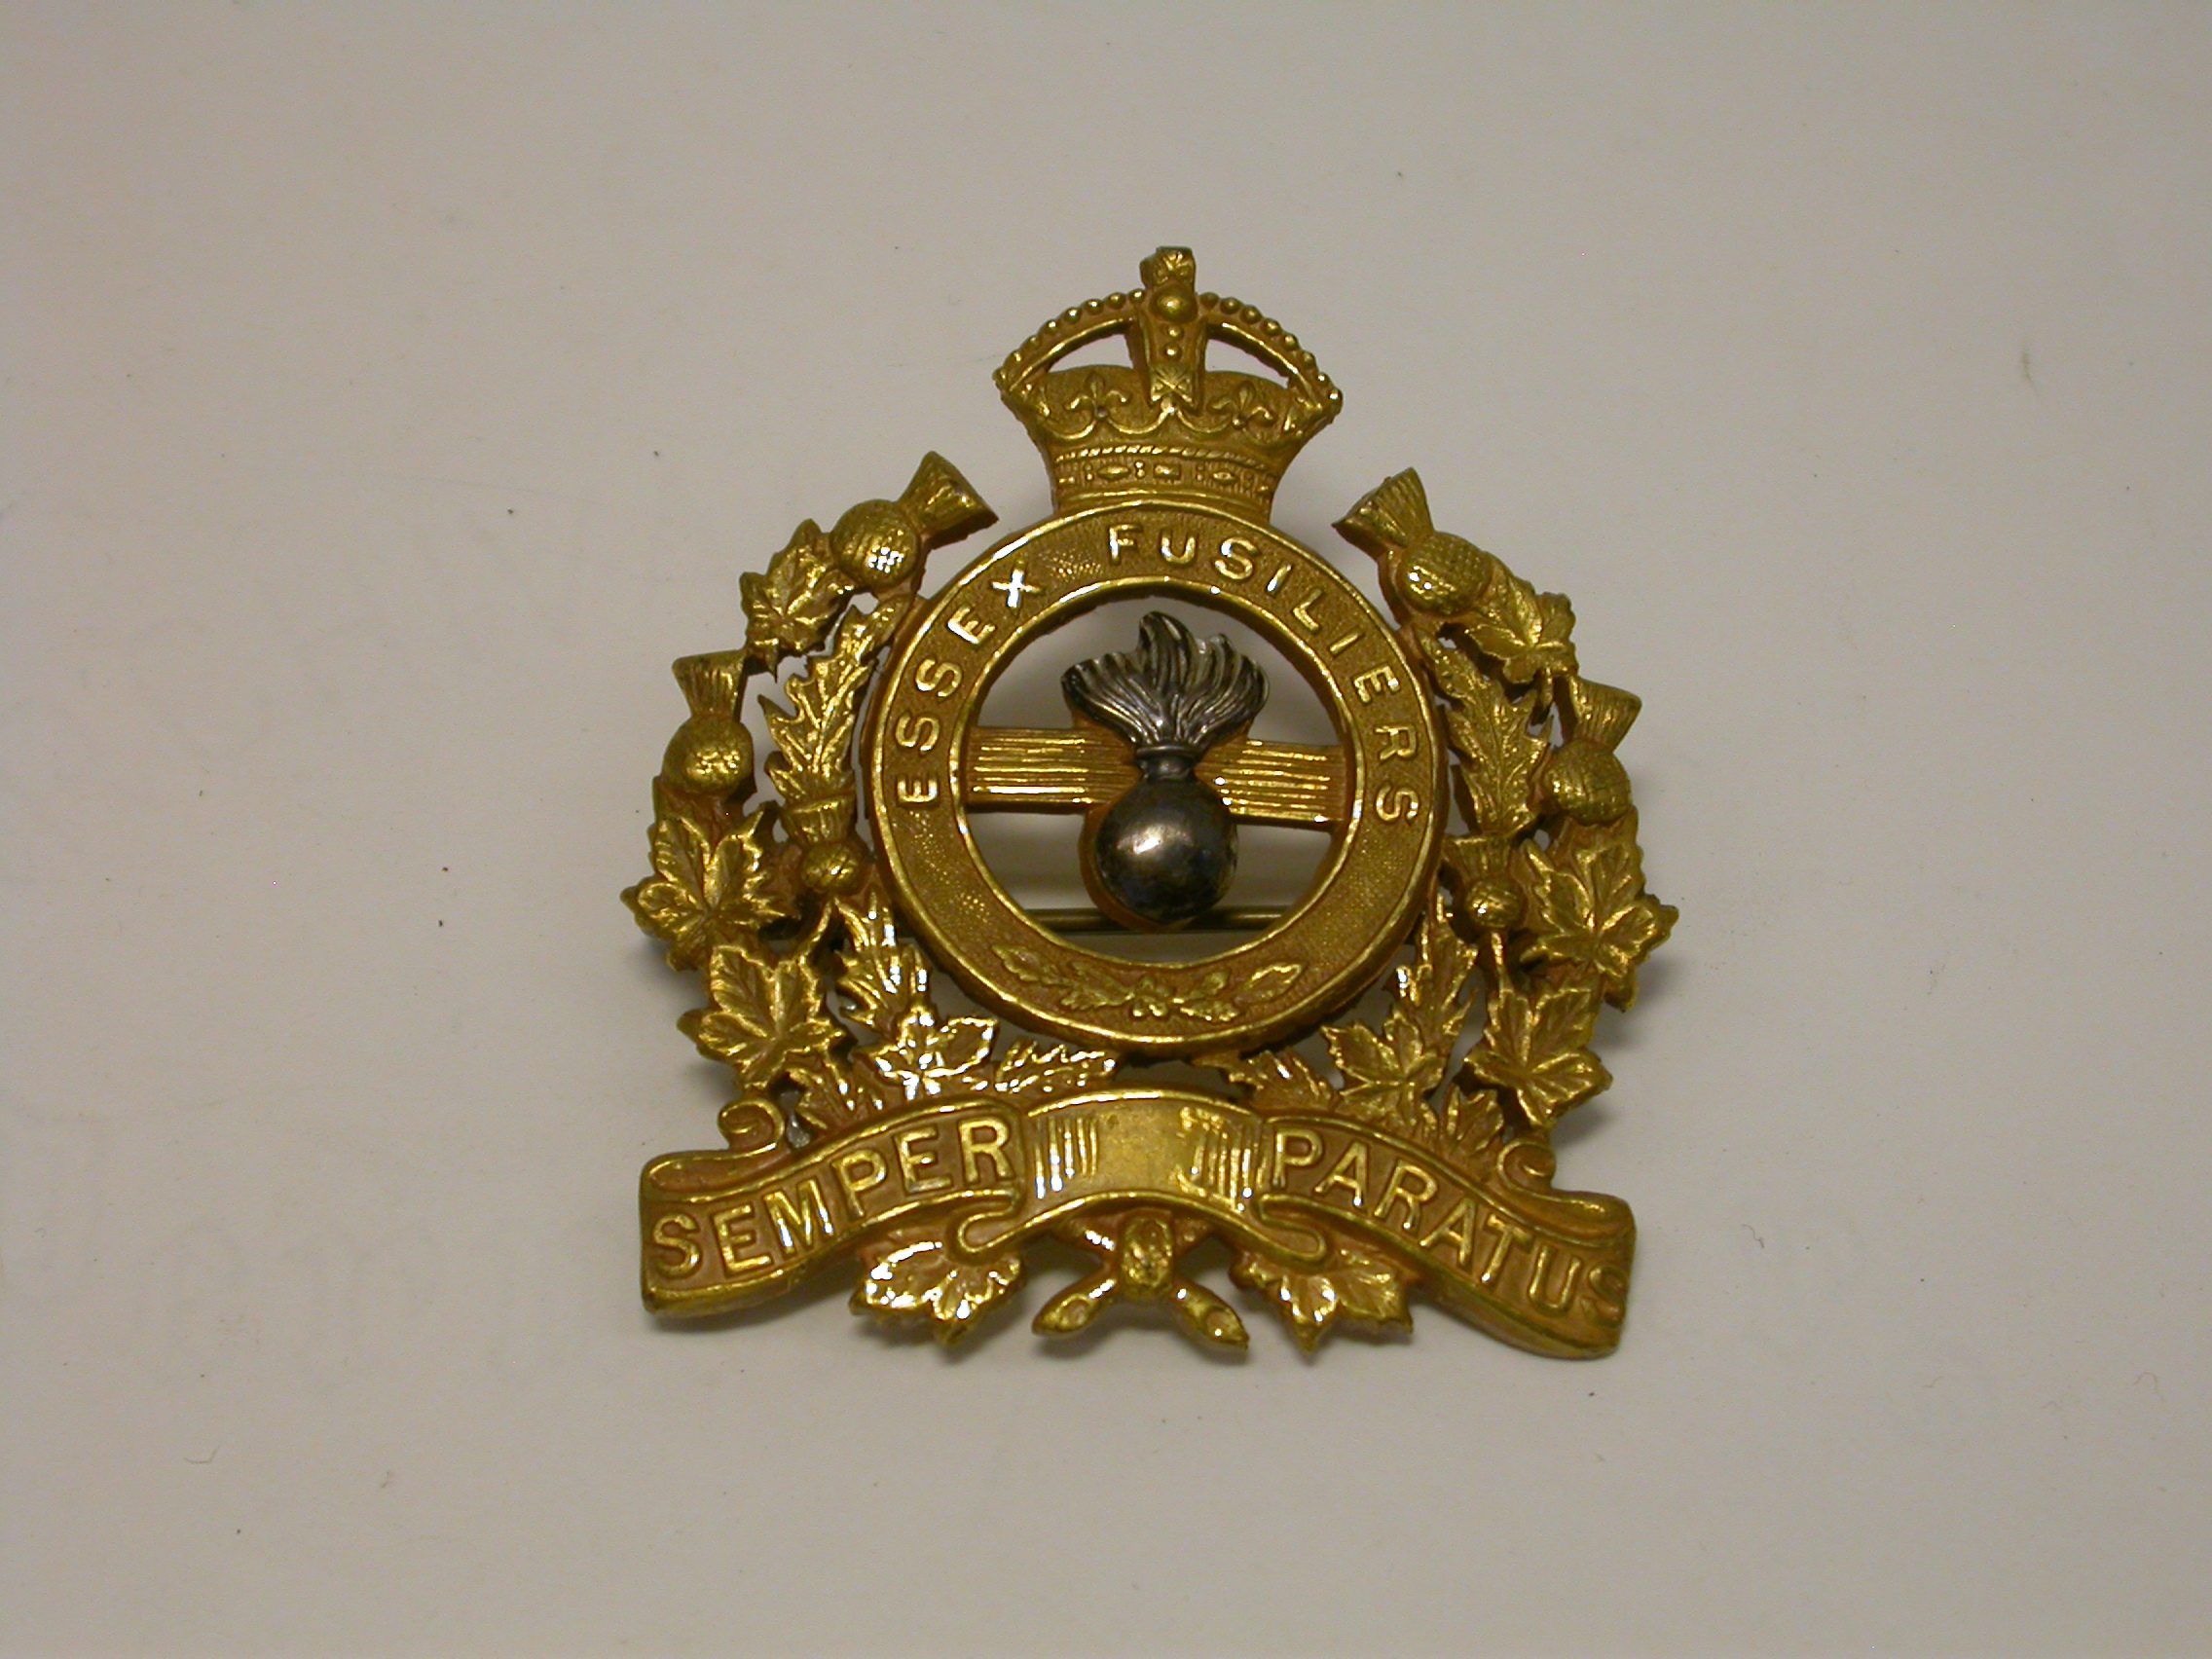 a%20brass%20cap%20jacket%20pin%20for%20the%20Essex%20Fusiliers